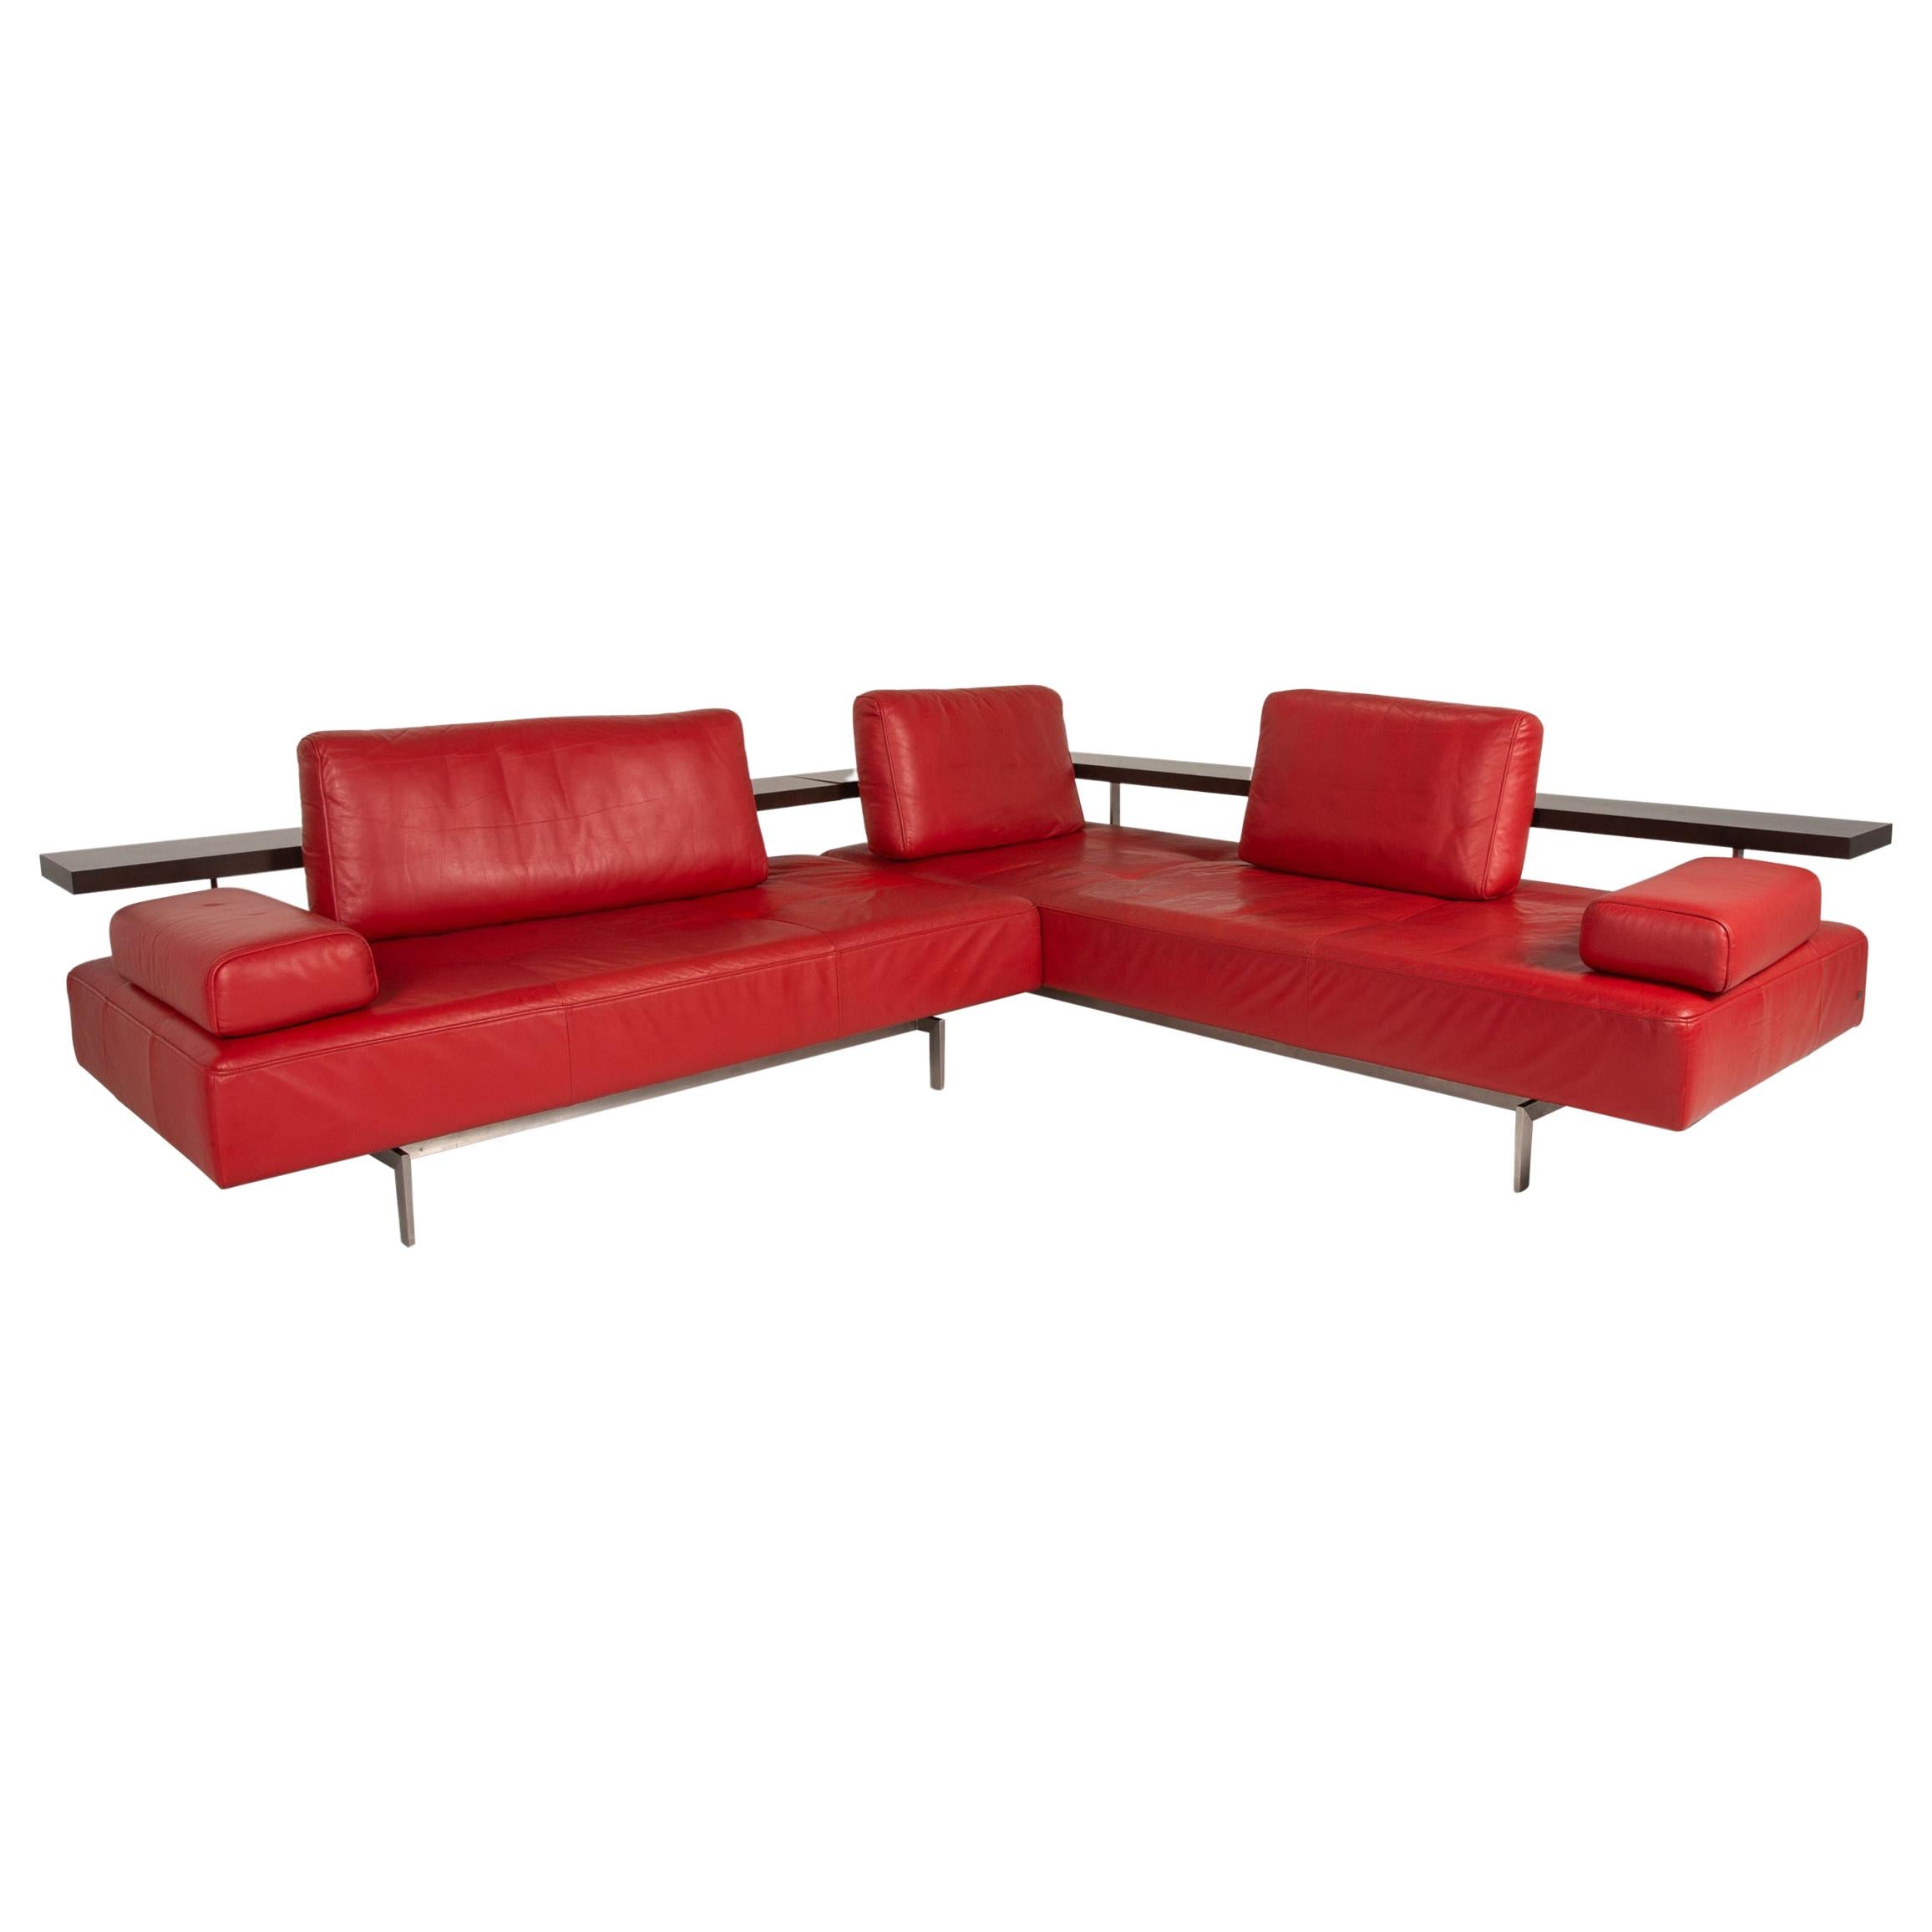 Rolf Benz Dono Leather Corner Sofa Red Couch Sofa For Sale